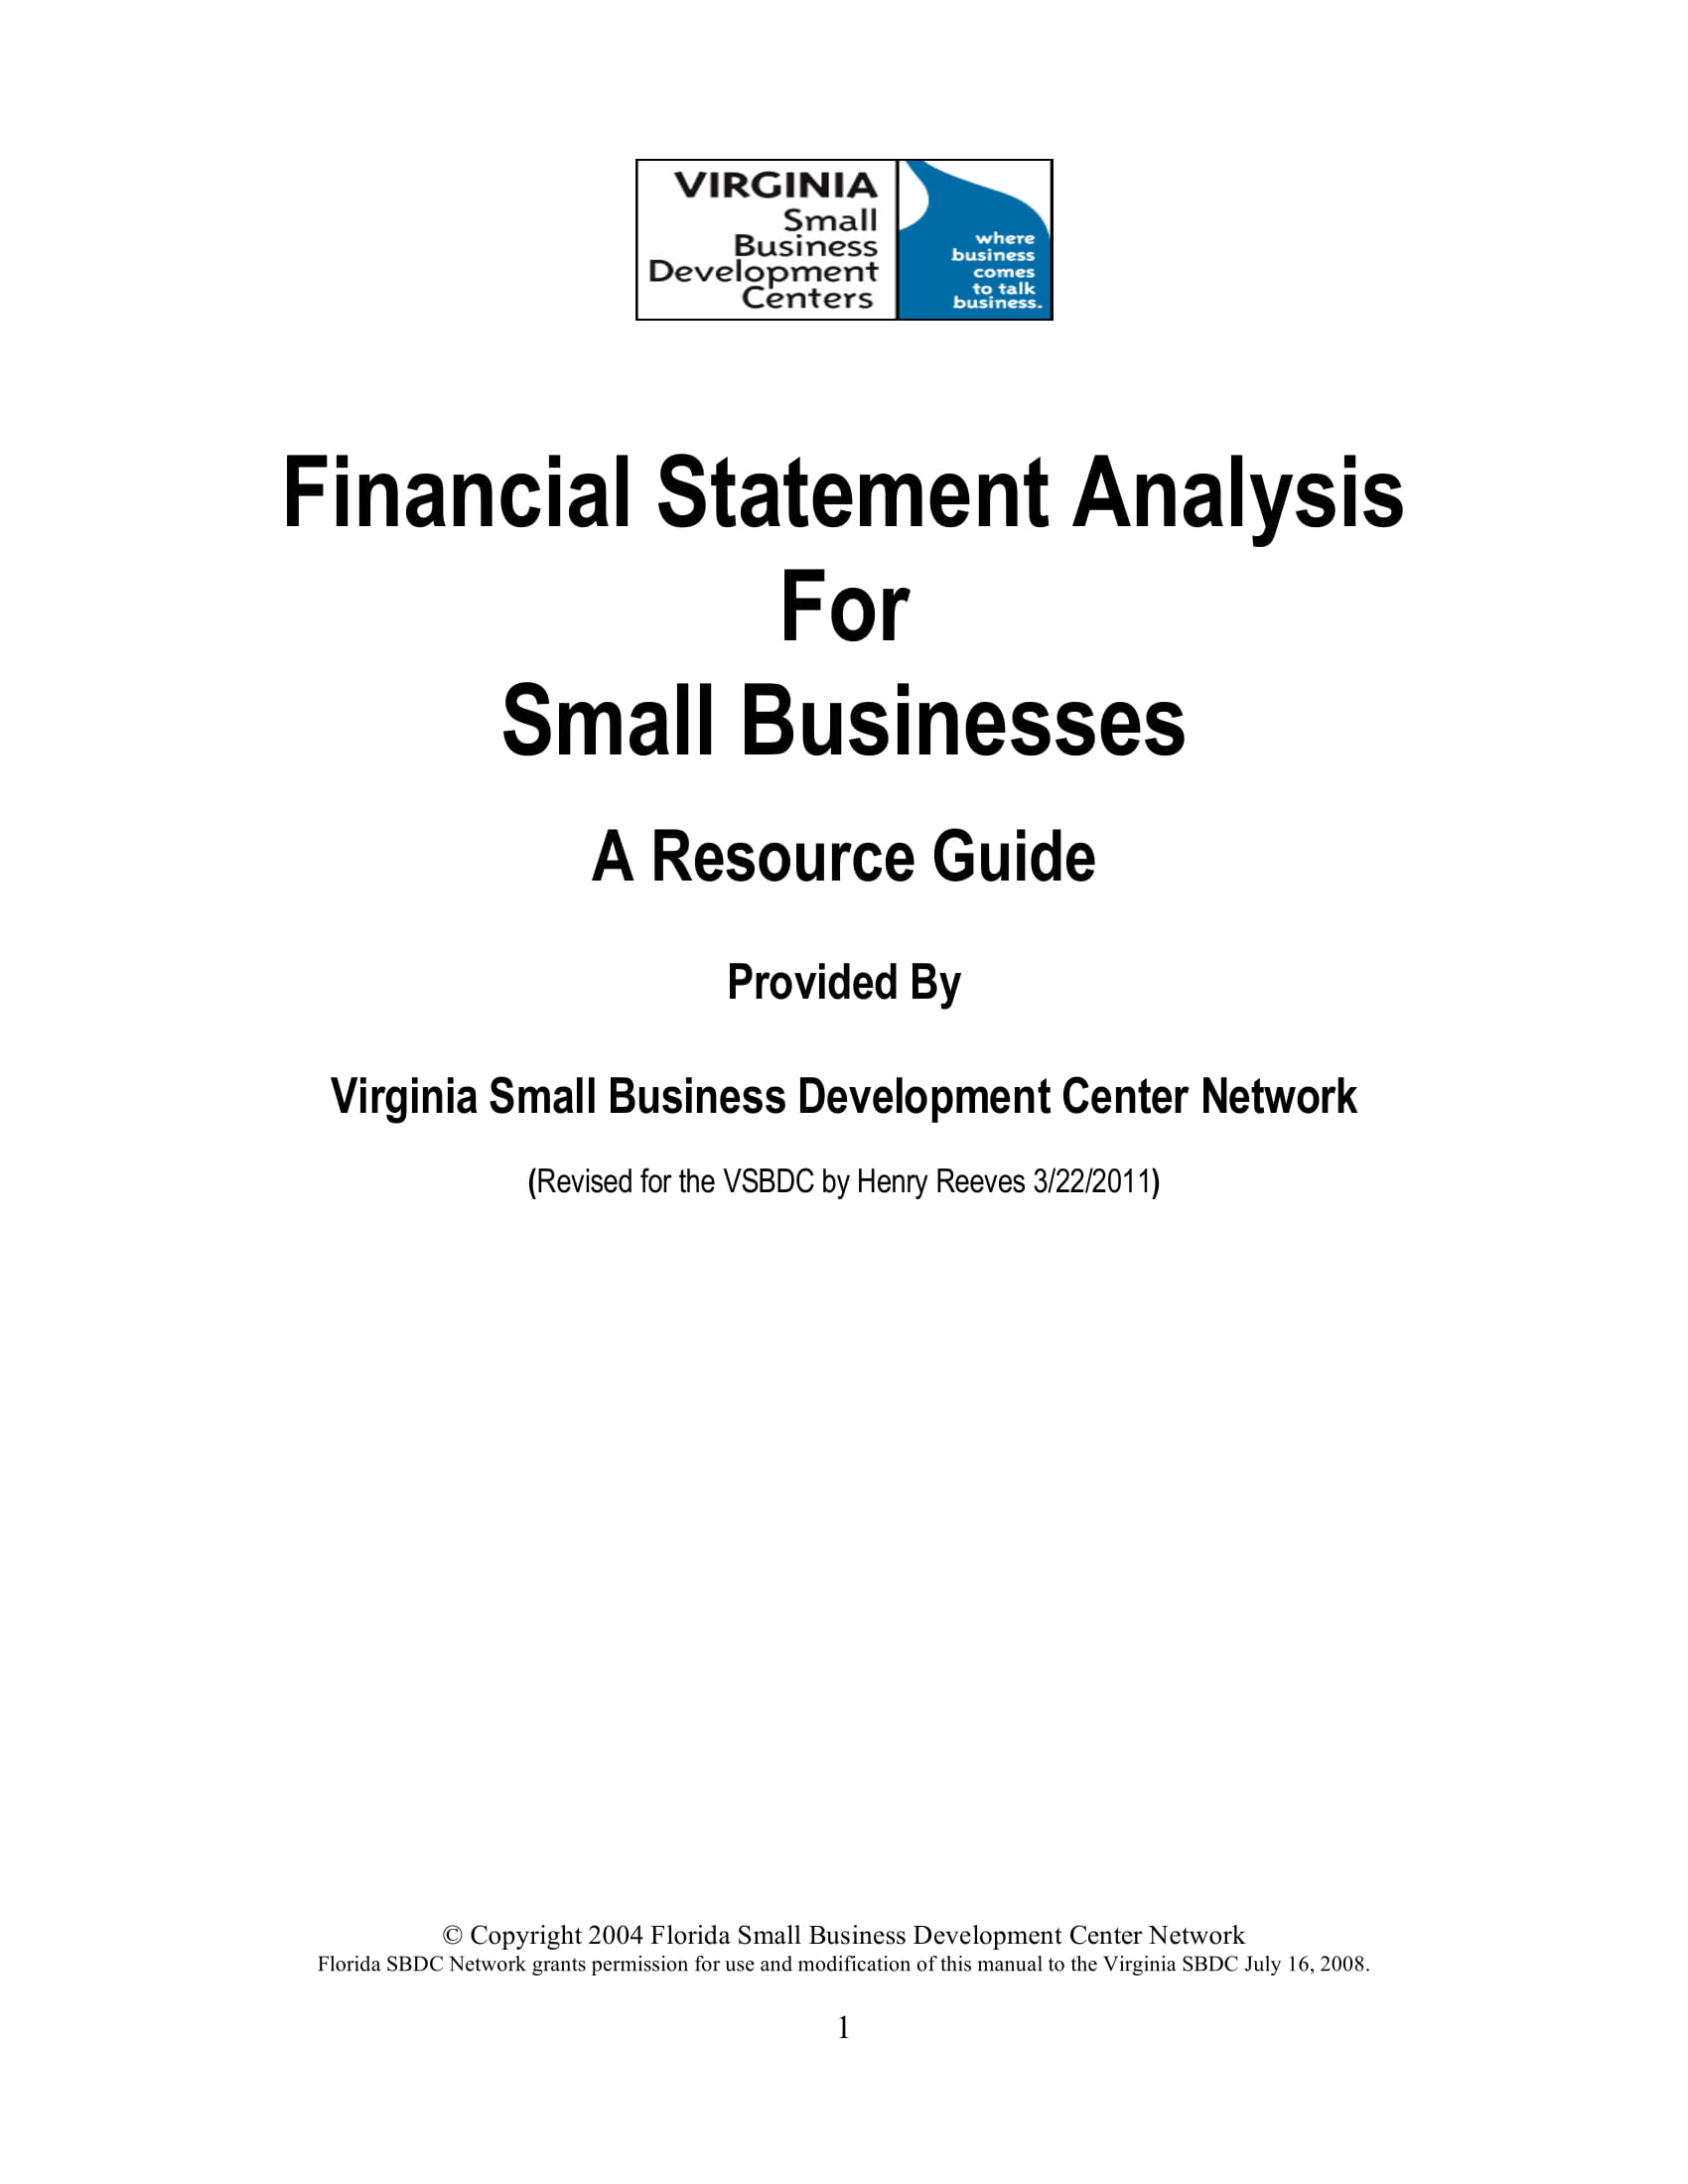 financial statement analysis for small businesses example 01